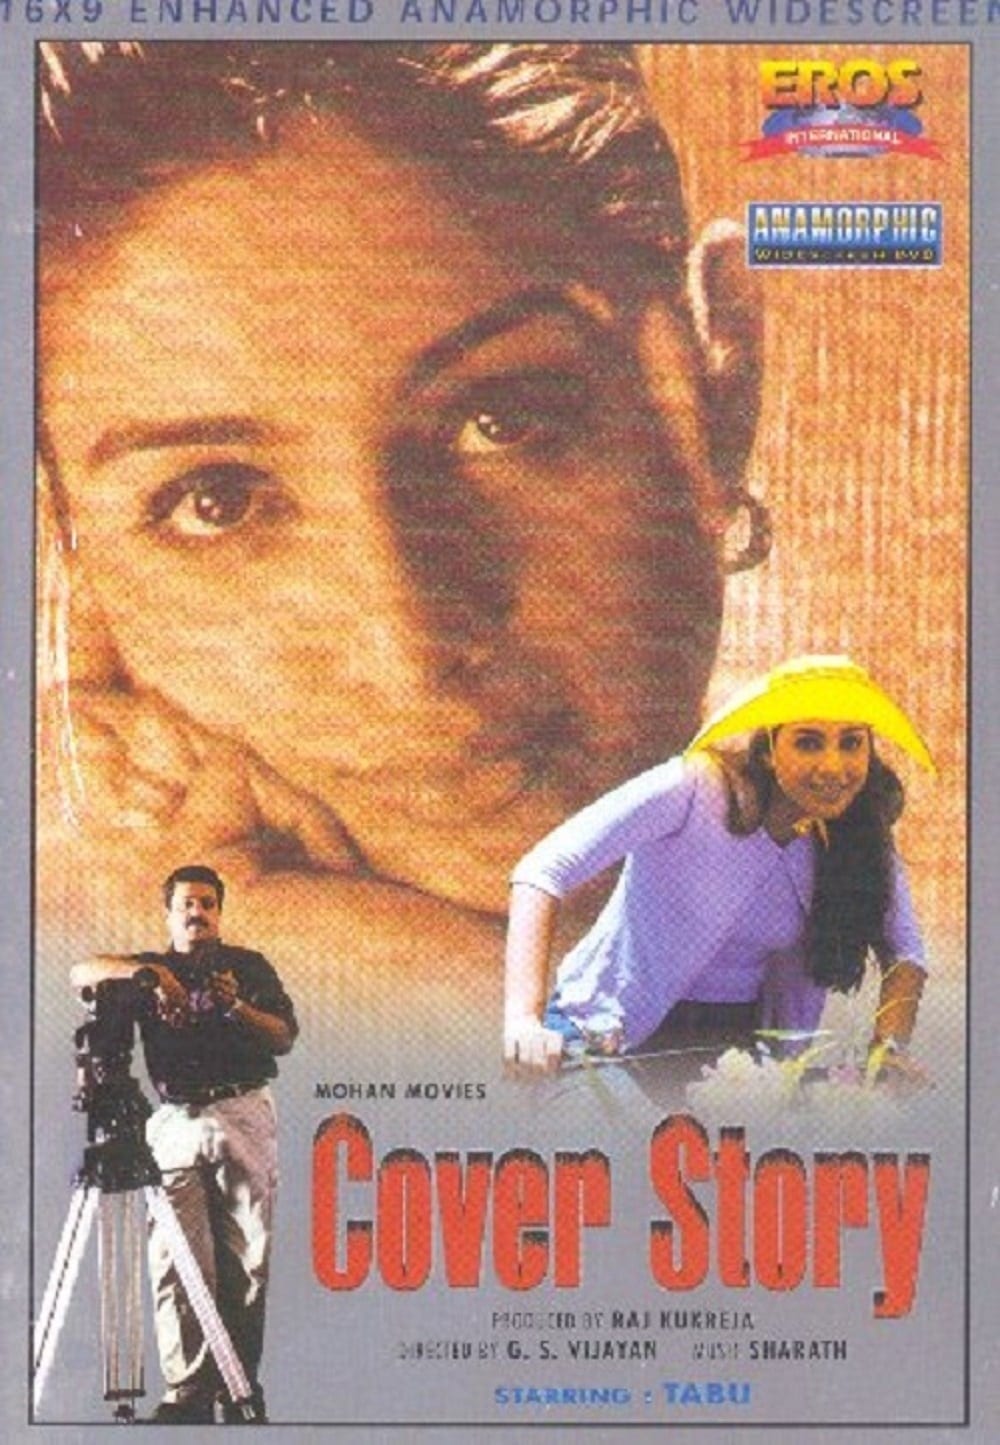 Poster for the movie "Cover Story"